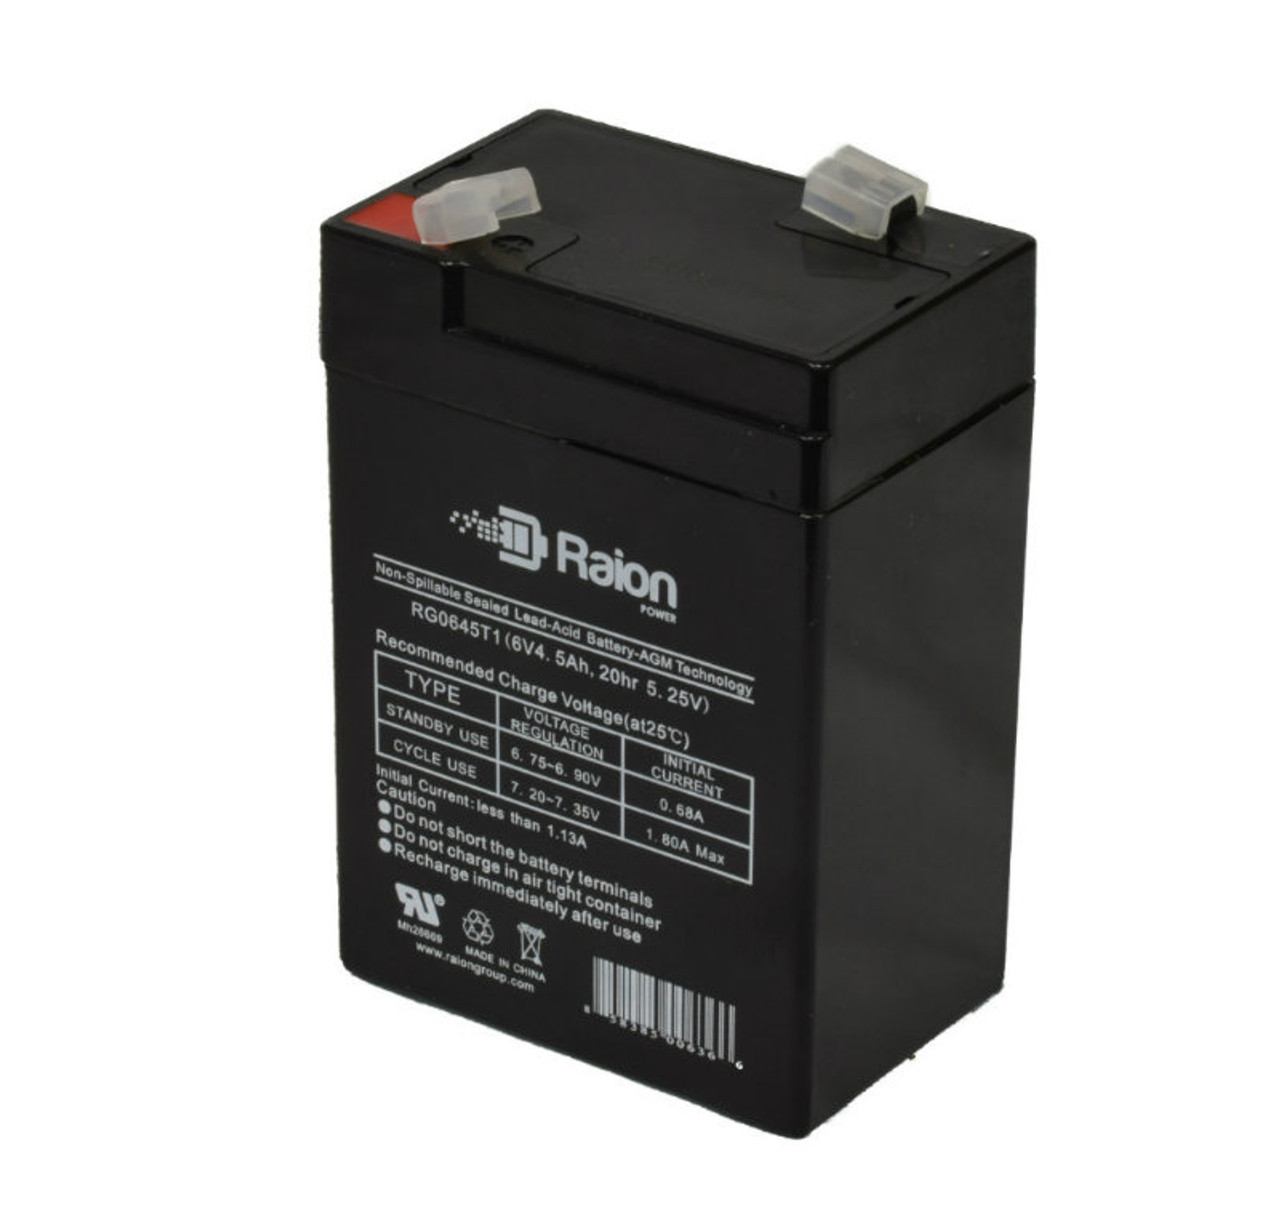 Raion Power RG0645T1 6V 4.5Ah Replacement Battery Cartridge for Panasonic LCRB064P